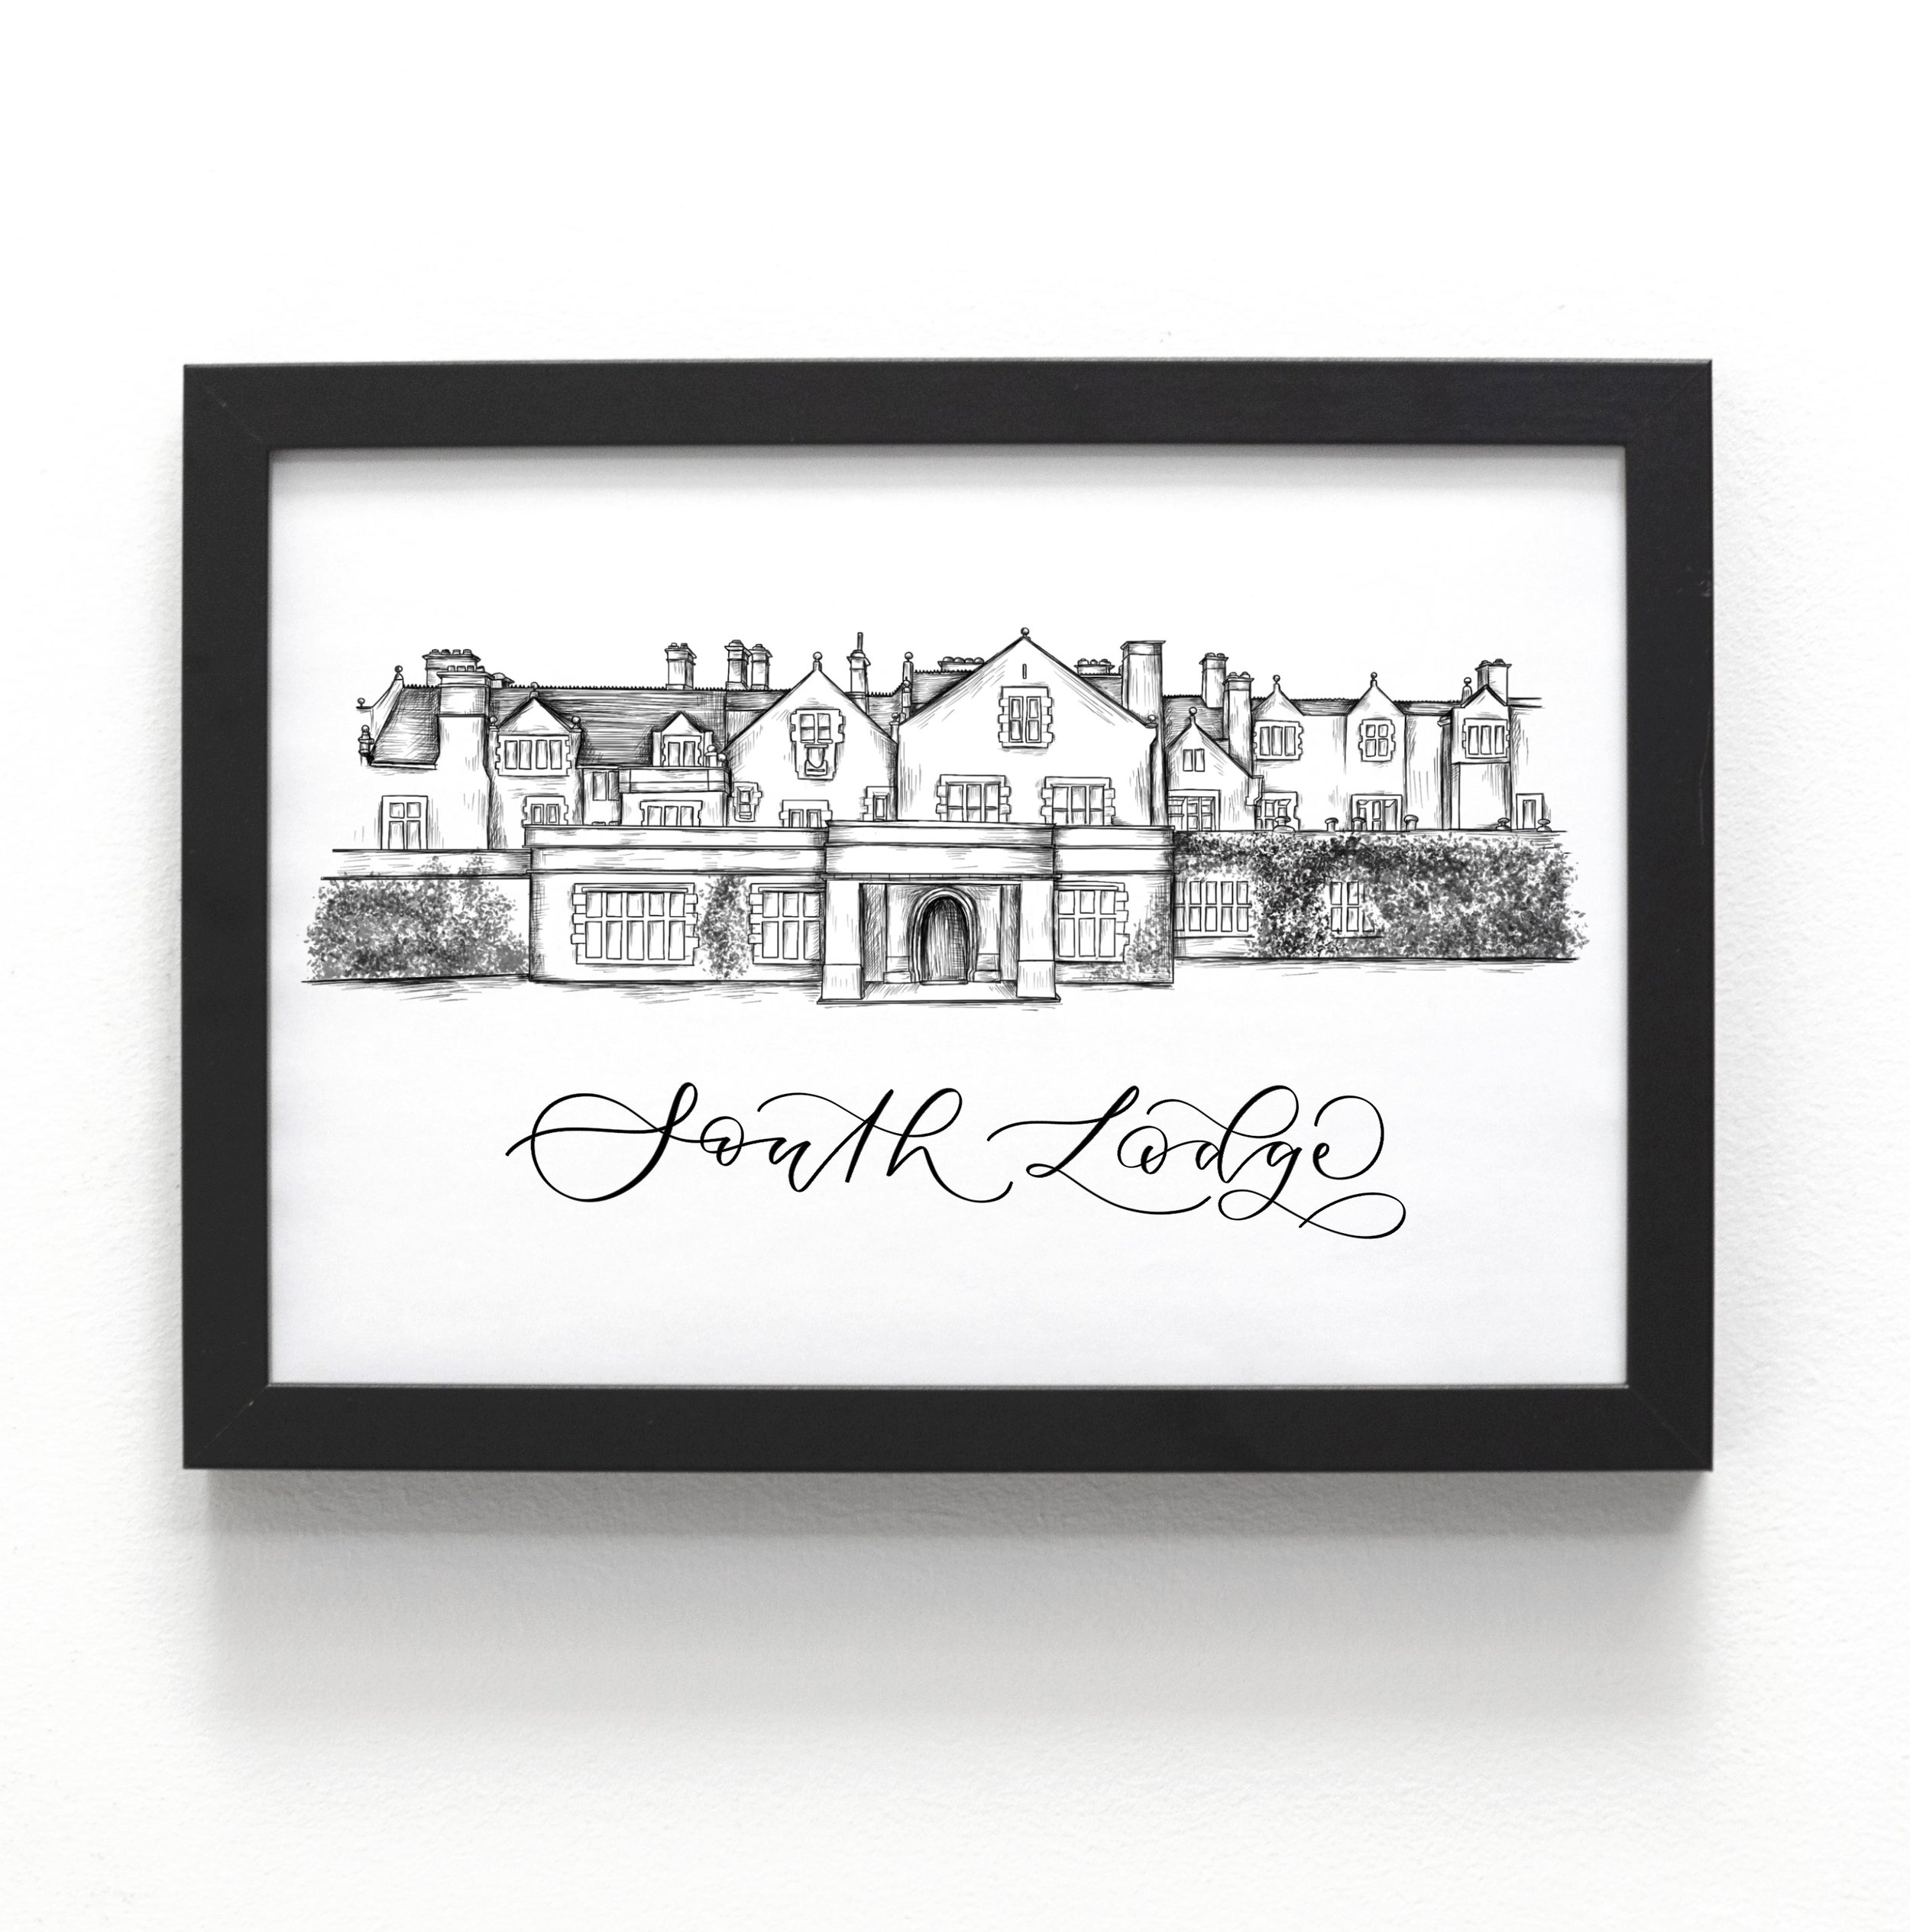 South Lodge drawing - venue illustration of South Lodge Hotel by The Amyverse  - South Lodge wedding.jpeg